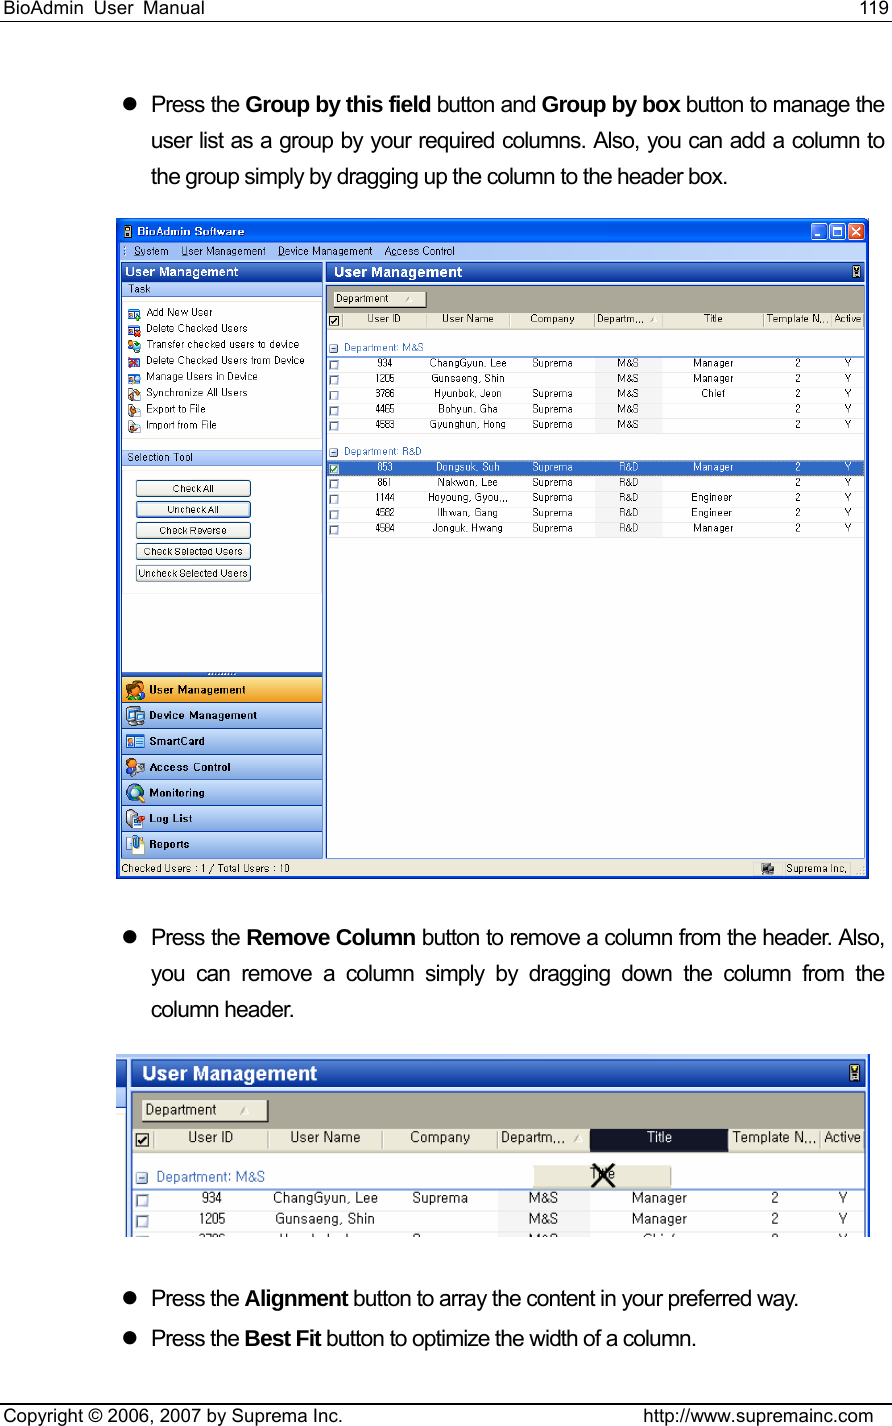 BioAdmin User Manual                                                                     119   Copyright © 2006, 2007 by Suprema Inc.                                http://www.supremainc.com z Press the Group by this field button and Group by box button to manage the user list as a group by your required columns. Also, you can add a column to the group simply by dragging up the column to the header box.    z Press the Remove Column button to remove a column from the header. Also, you can remove a column simply by dragging down the column from the column header.    z Press the Alignment button to array the content in your preferred way.     z Press the Best Fit button to optimize the width of a column.   